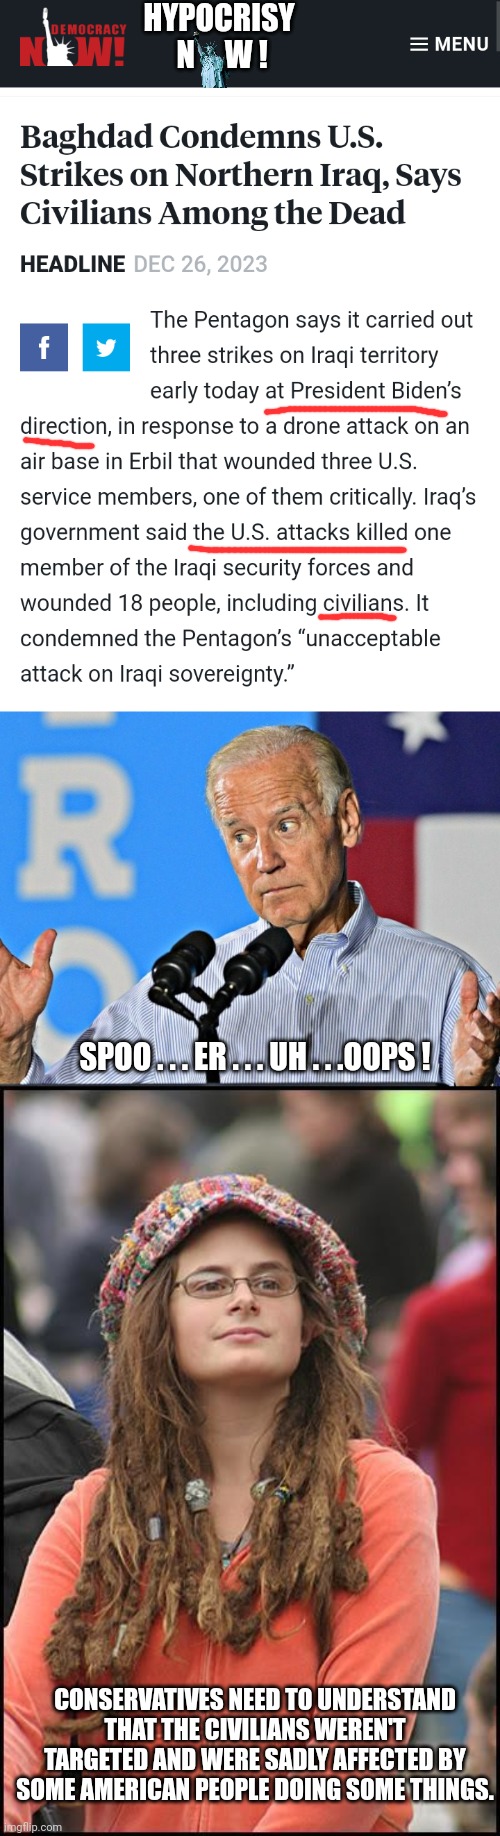 What say you now leftist liberal democrats? | HYPOCRISY 
N     W ! SPOO . . . ER . . . UH . . .OOPS ! CONSERVATIVES NEED TO UNDERSTAND THAT THE CIVILIANS WEREN'T TARGETED AND WERE SADLY AFFECTED BY SOME AMERICAN PEOPLE DOING SOME THINGS. | image tagged in joe biden shrug,college liberal,hypocrisy,liberals,leftists,democrats | made w/ Imgflip meme maker